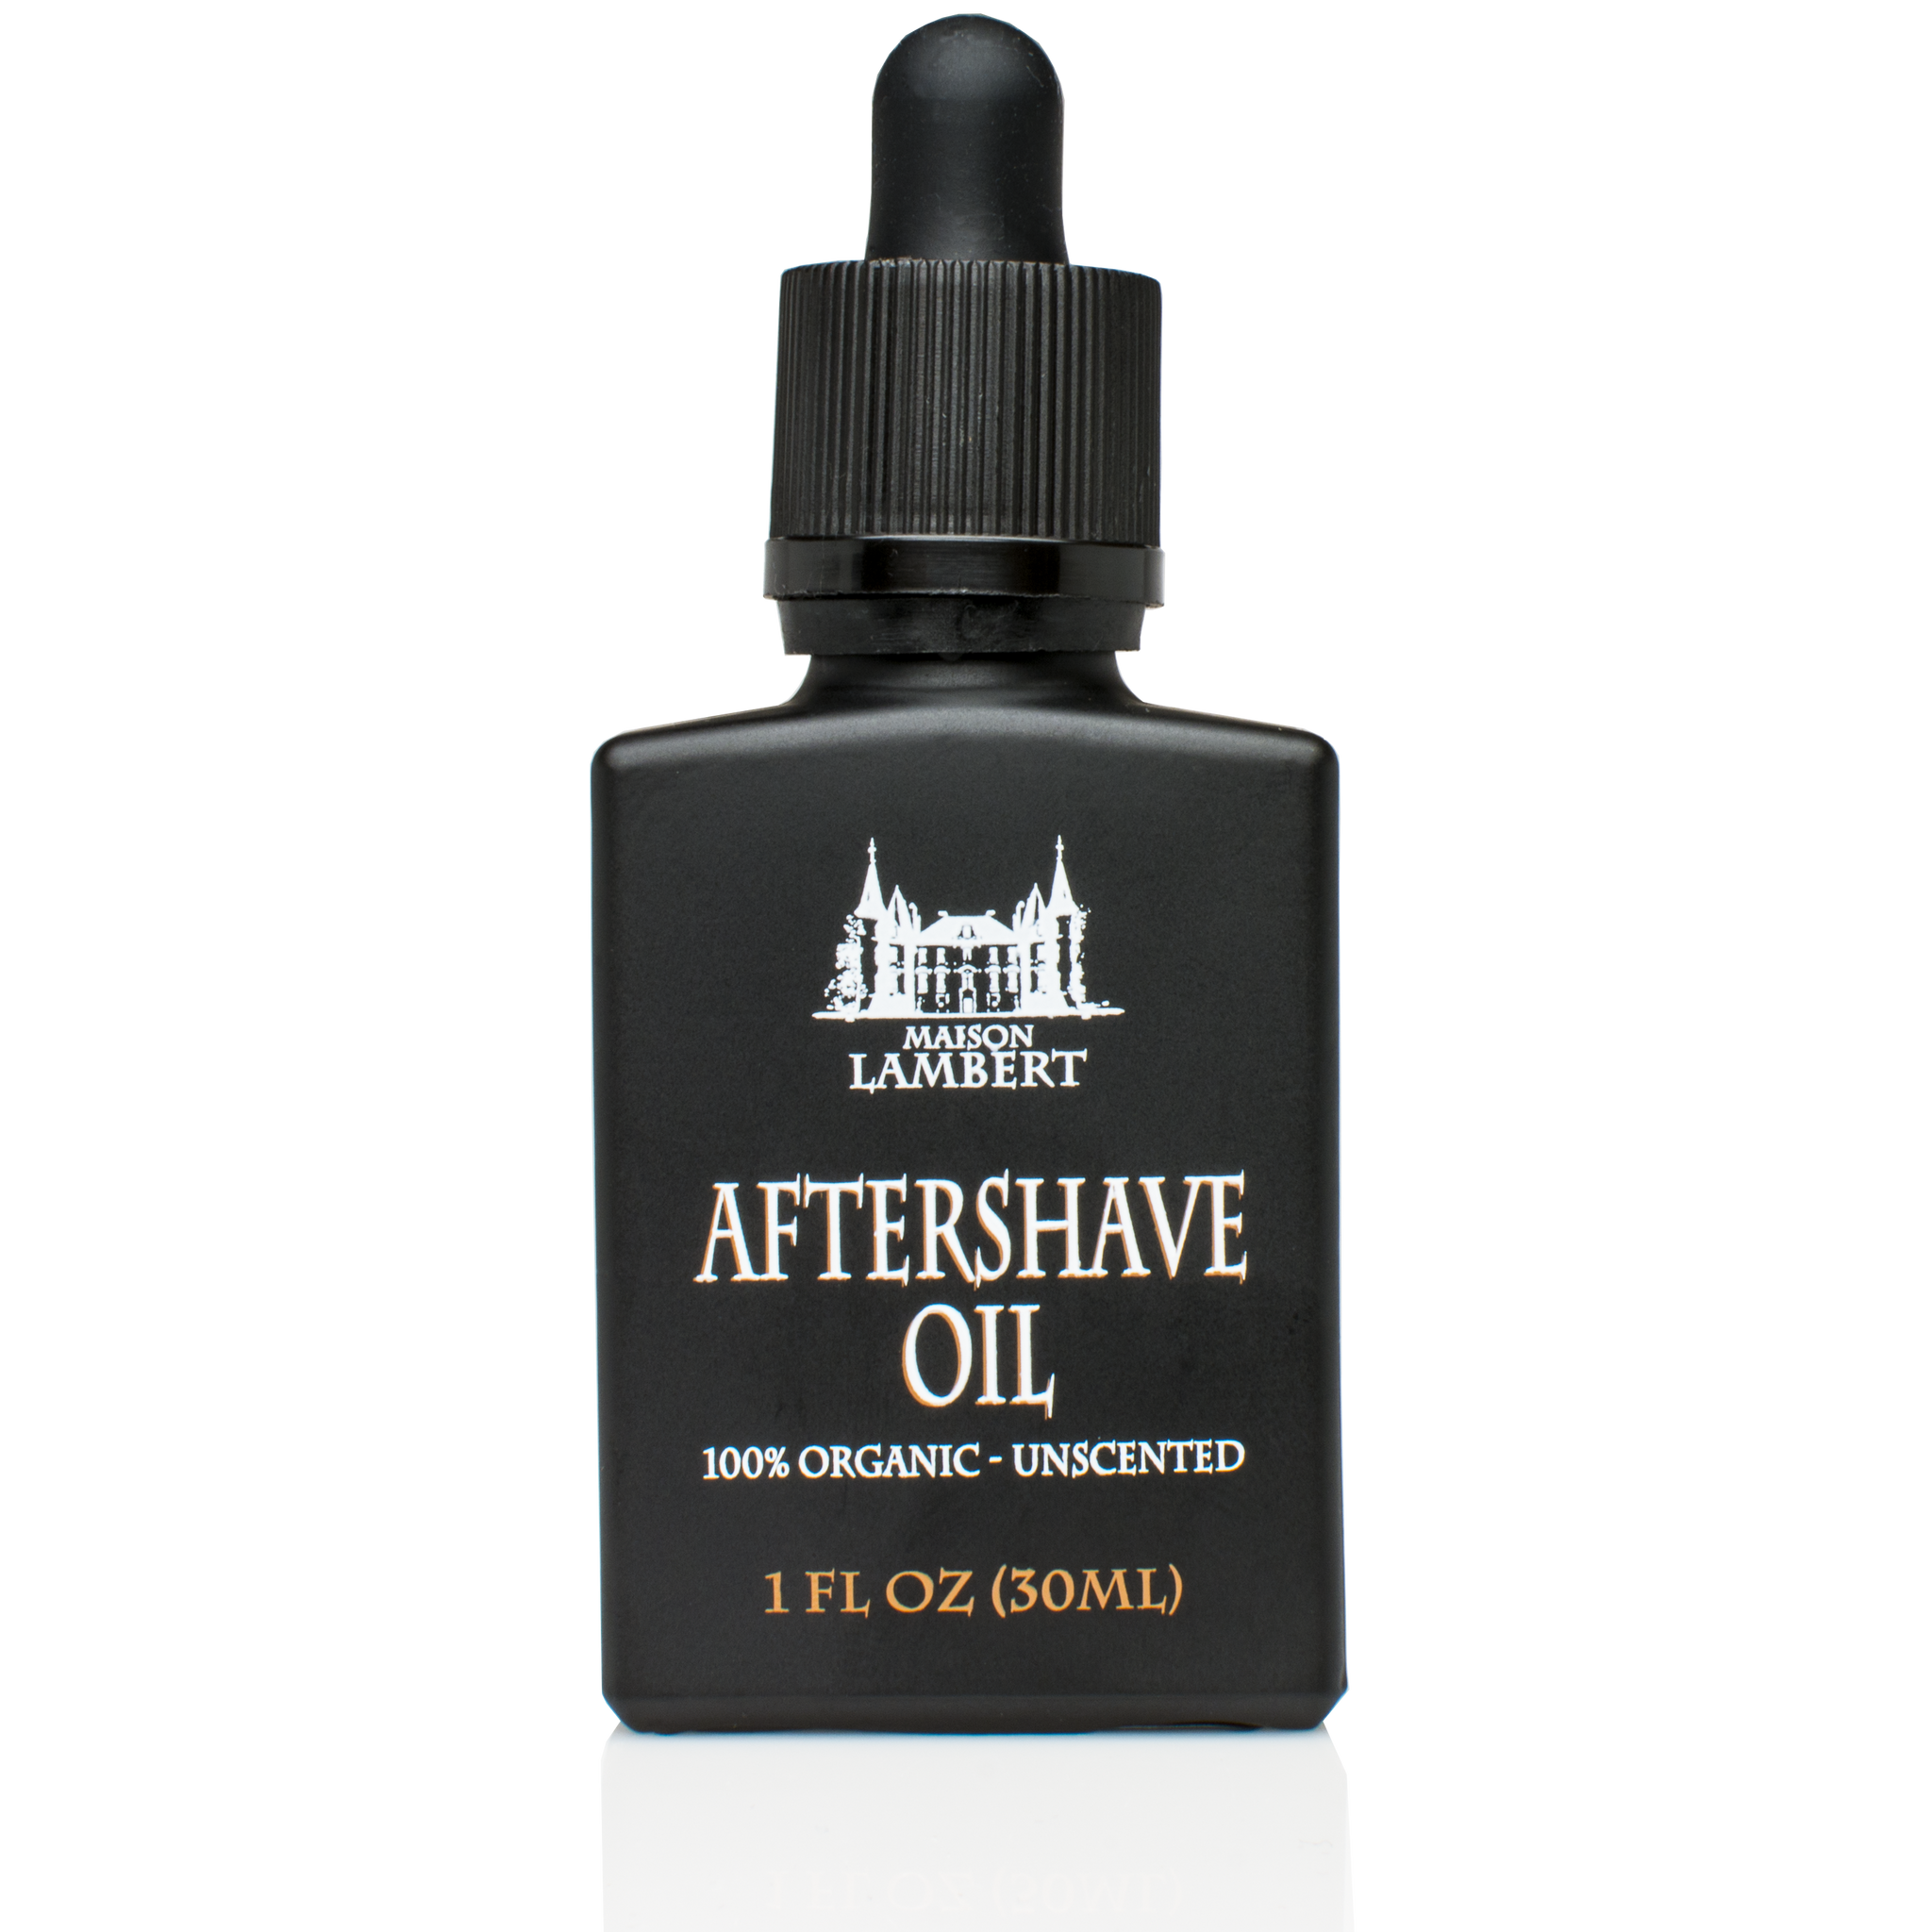 Aftershave - Maison Lambert Aftershave Oil - Made Of 100% Organic Ingredients! Unscented